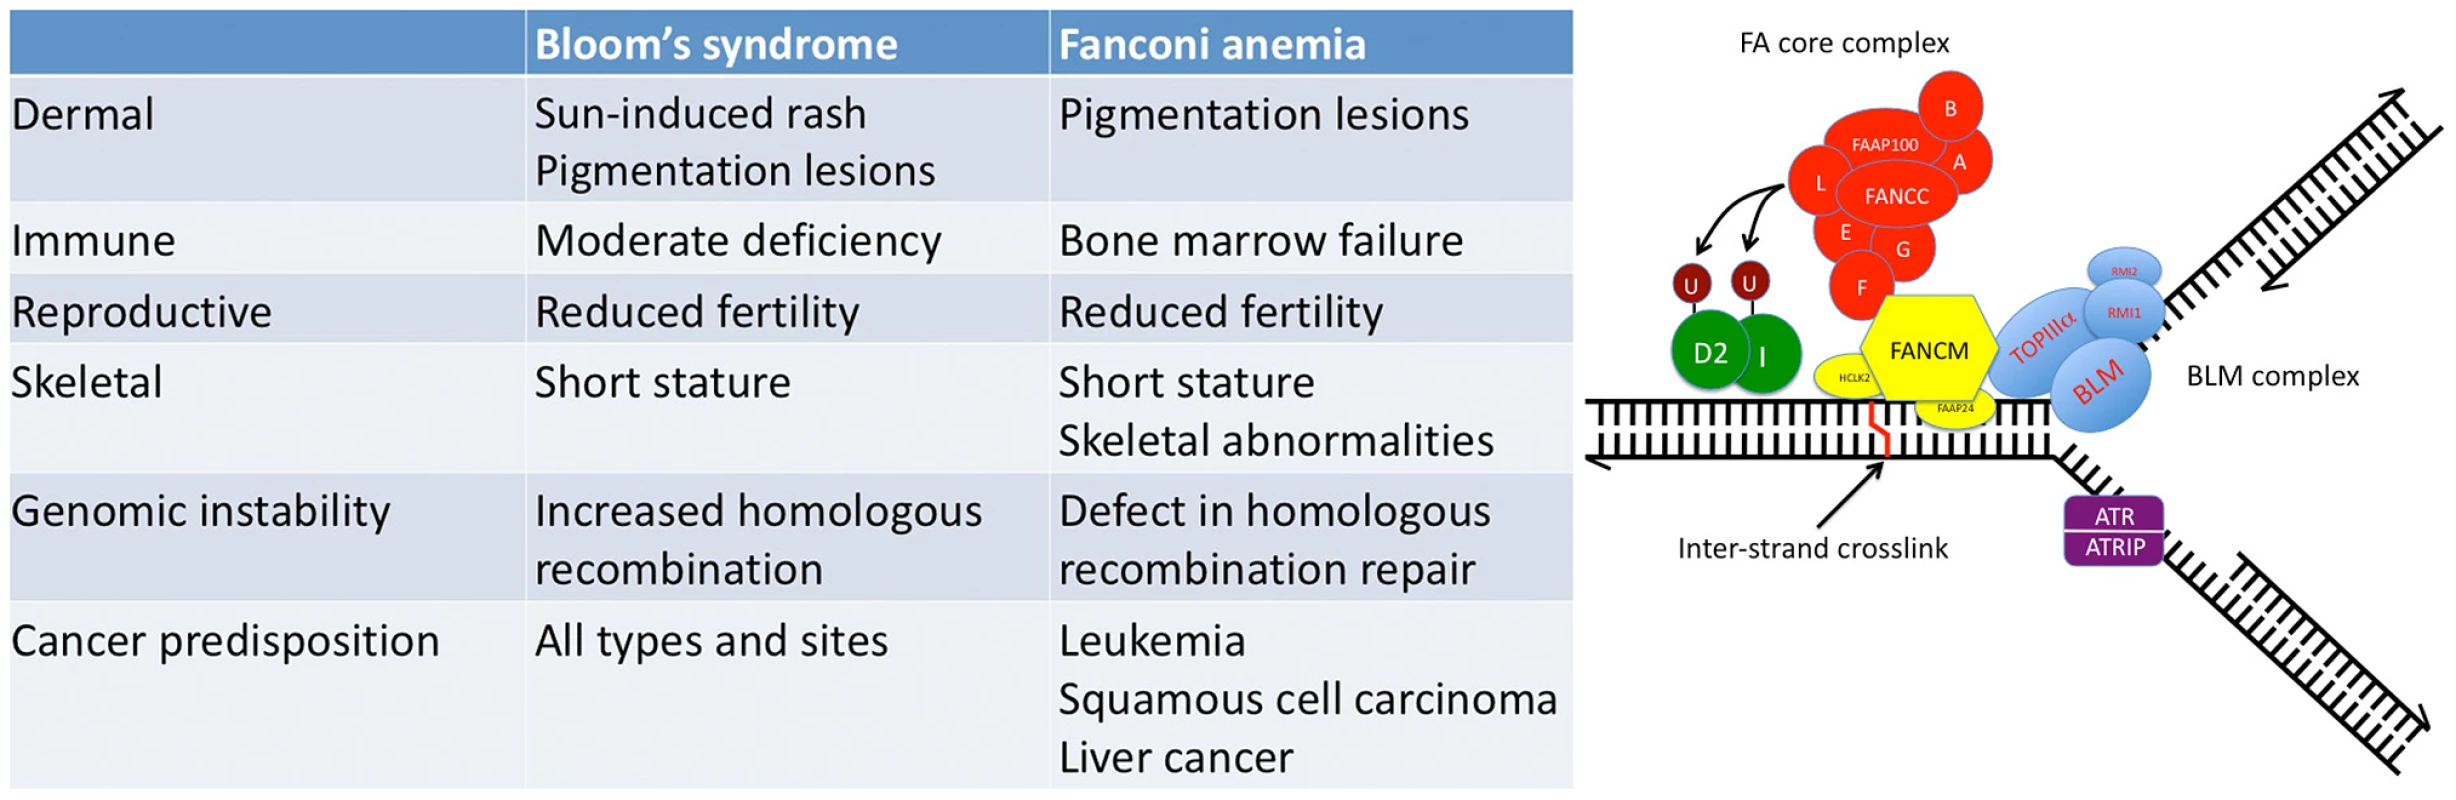 Fanconi anemia (FA) and Bloom's syndrome (BS) overlap at the clinical and molecular levels.